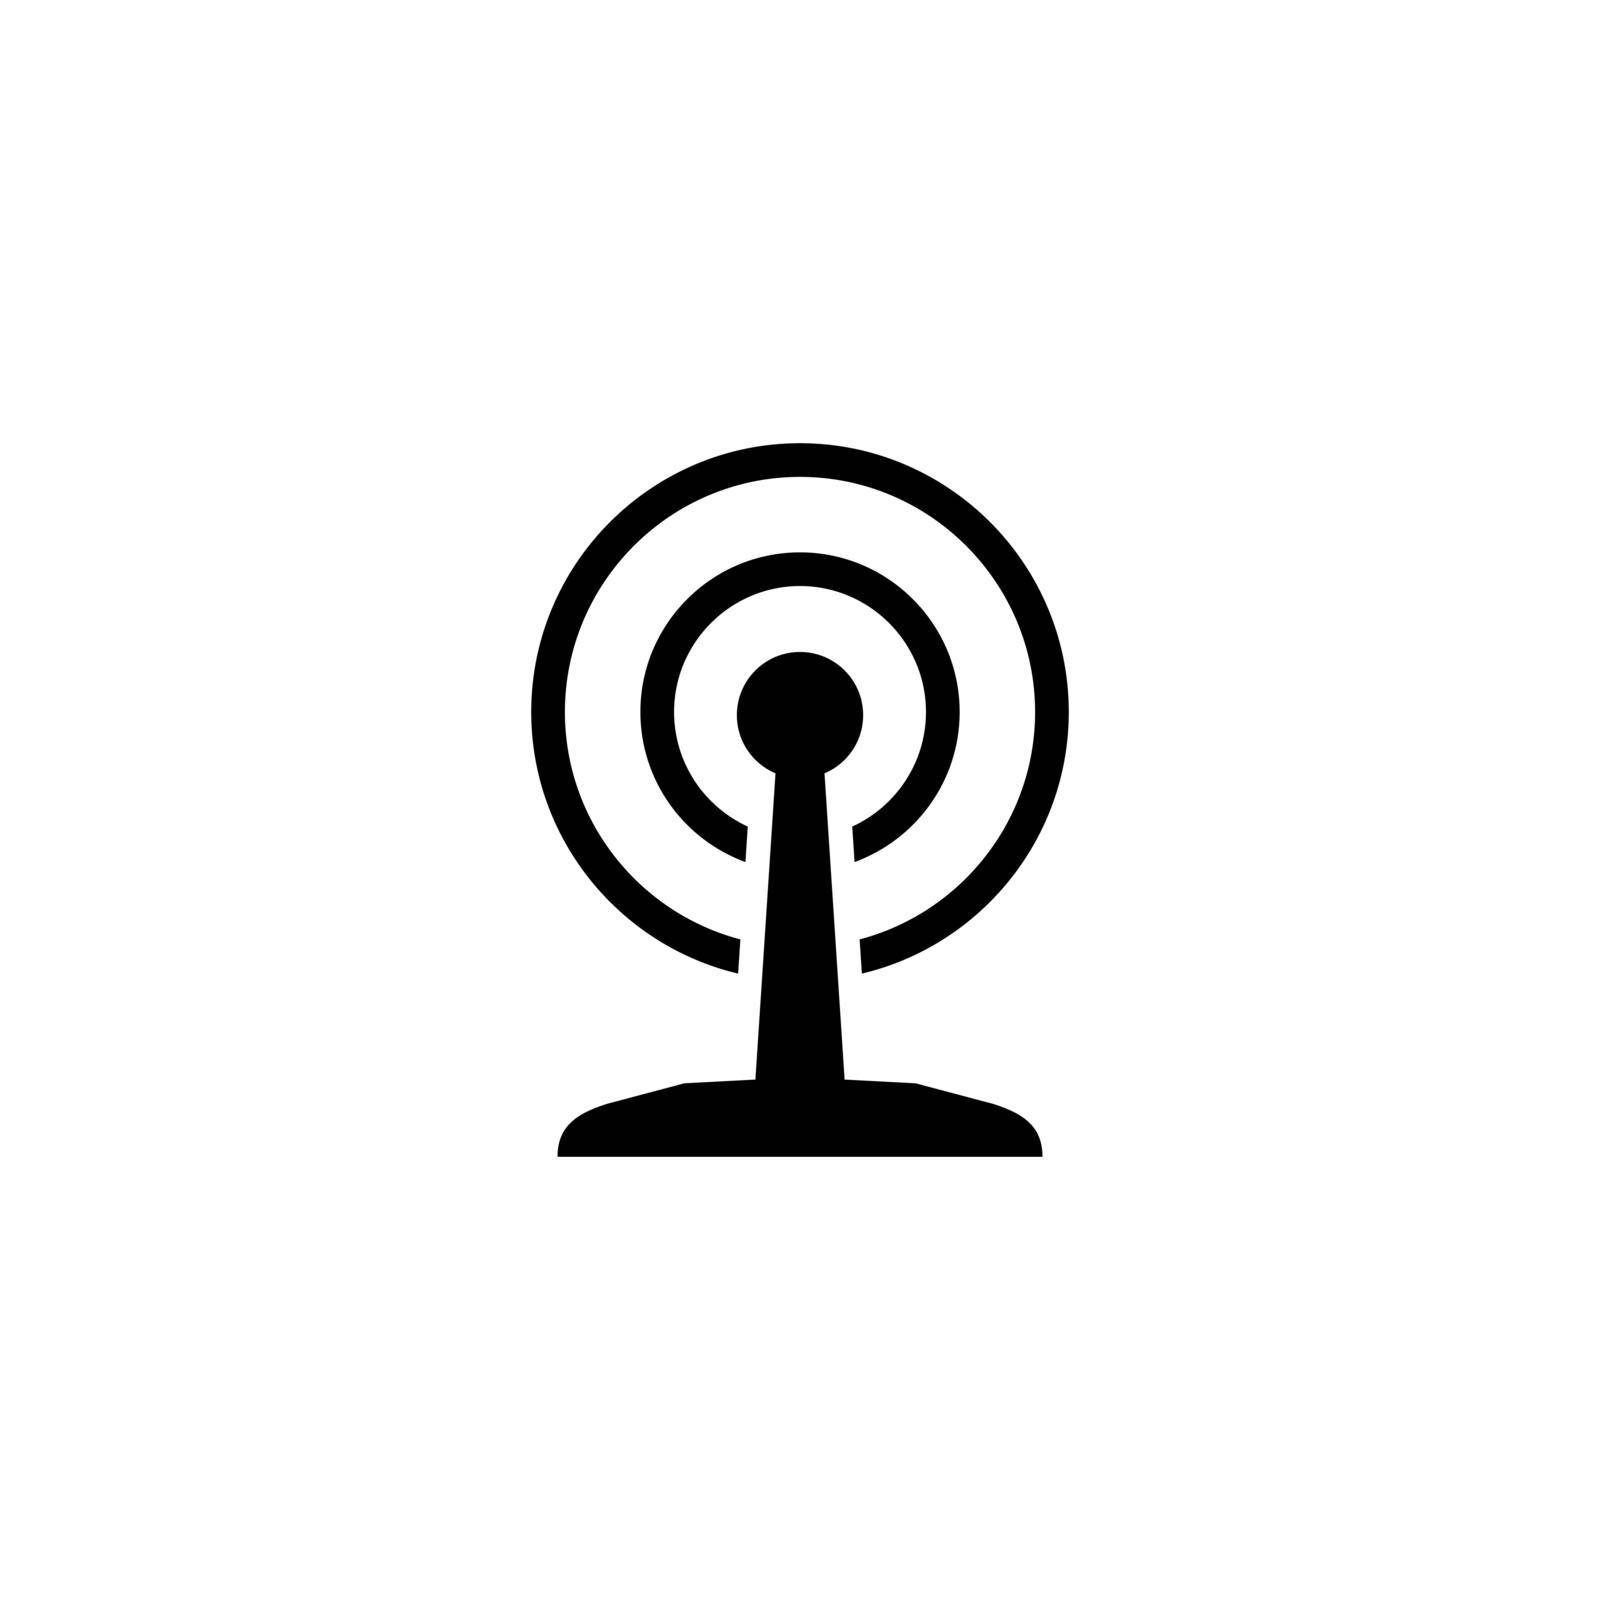 Broadcast Antenna. Flat Vector Icon. Simple black symbol on white background